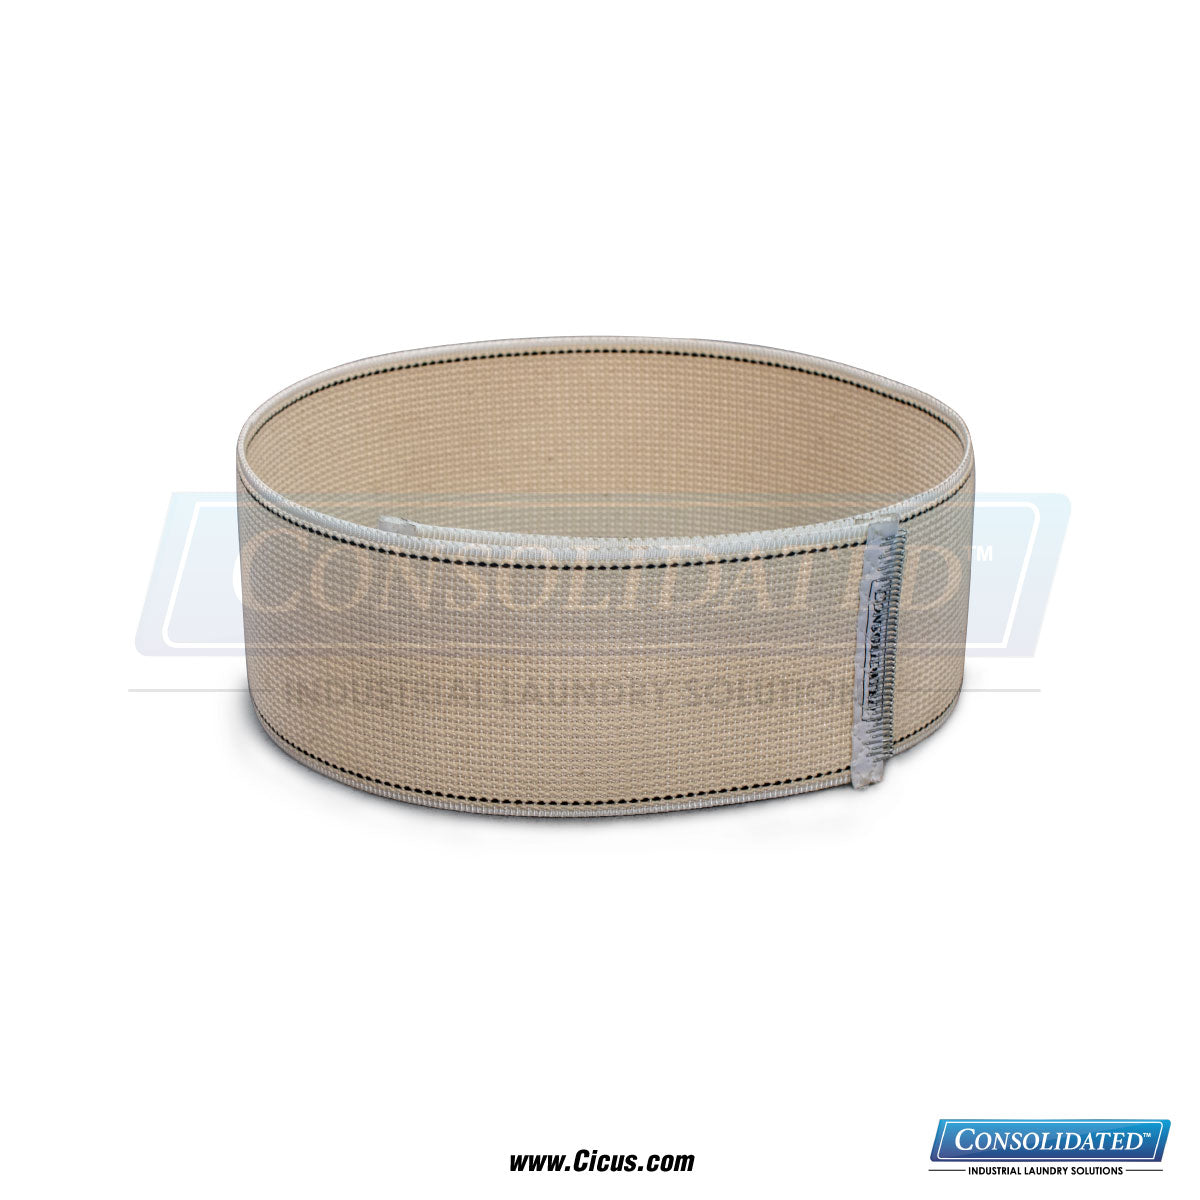 CIC Exclusive Chicago Dryer Canvas Ribbon - 2" x 116" (1001-248)